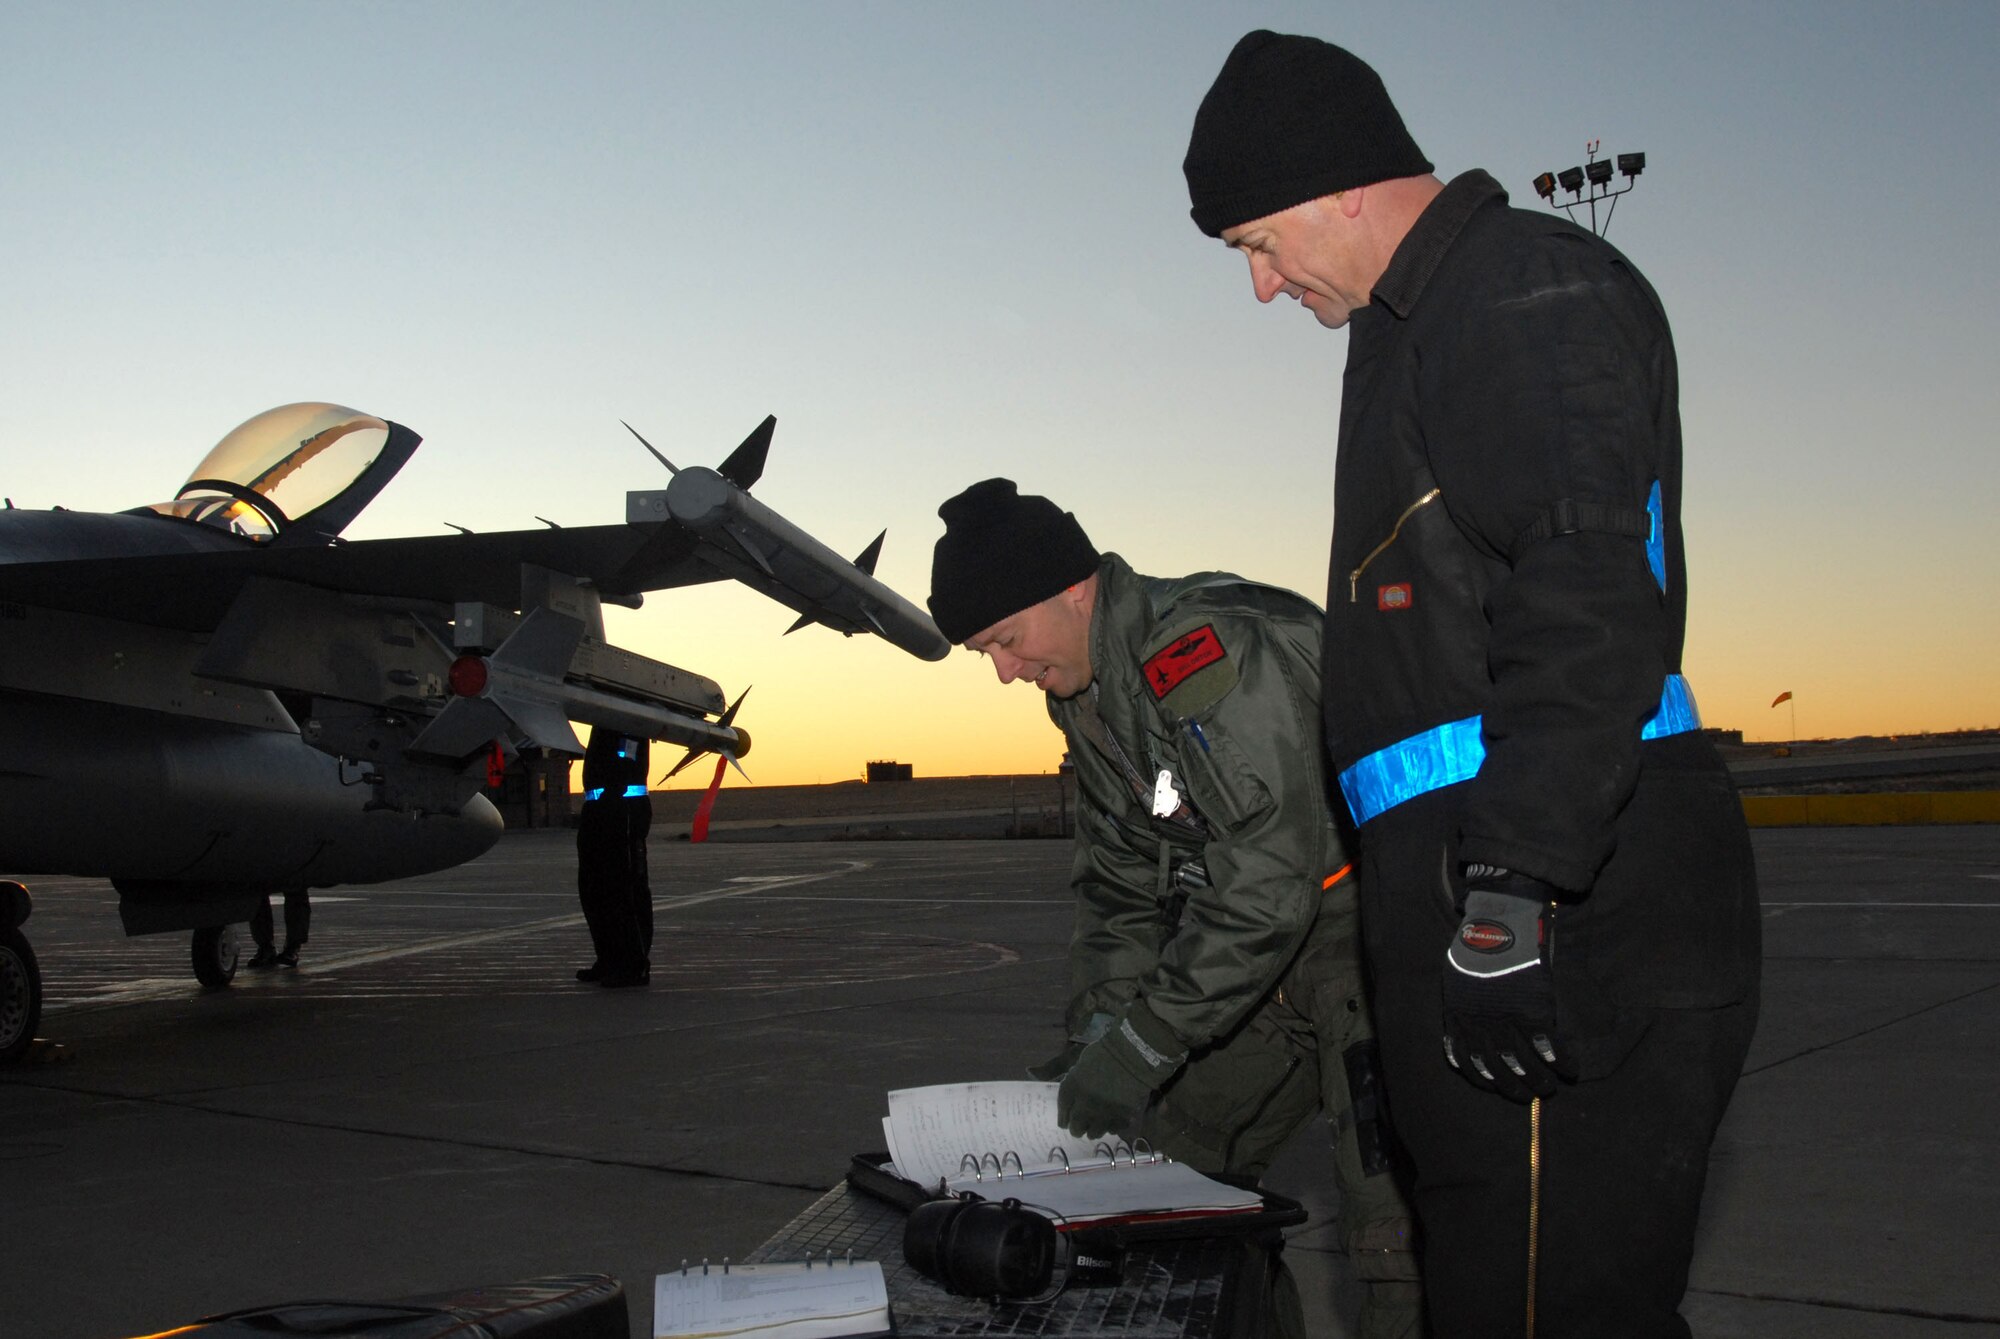 William E. Orton "Willy-O", a pilot from the 120th Operations Flight, performs pre-flight checks on his F-16 aircraft during an Operational Readiness Inspection, as the Crew Chief looks on.